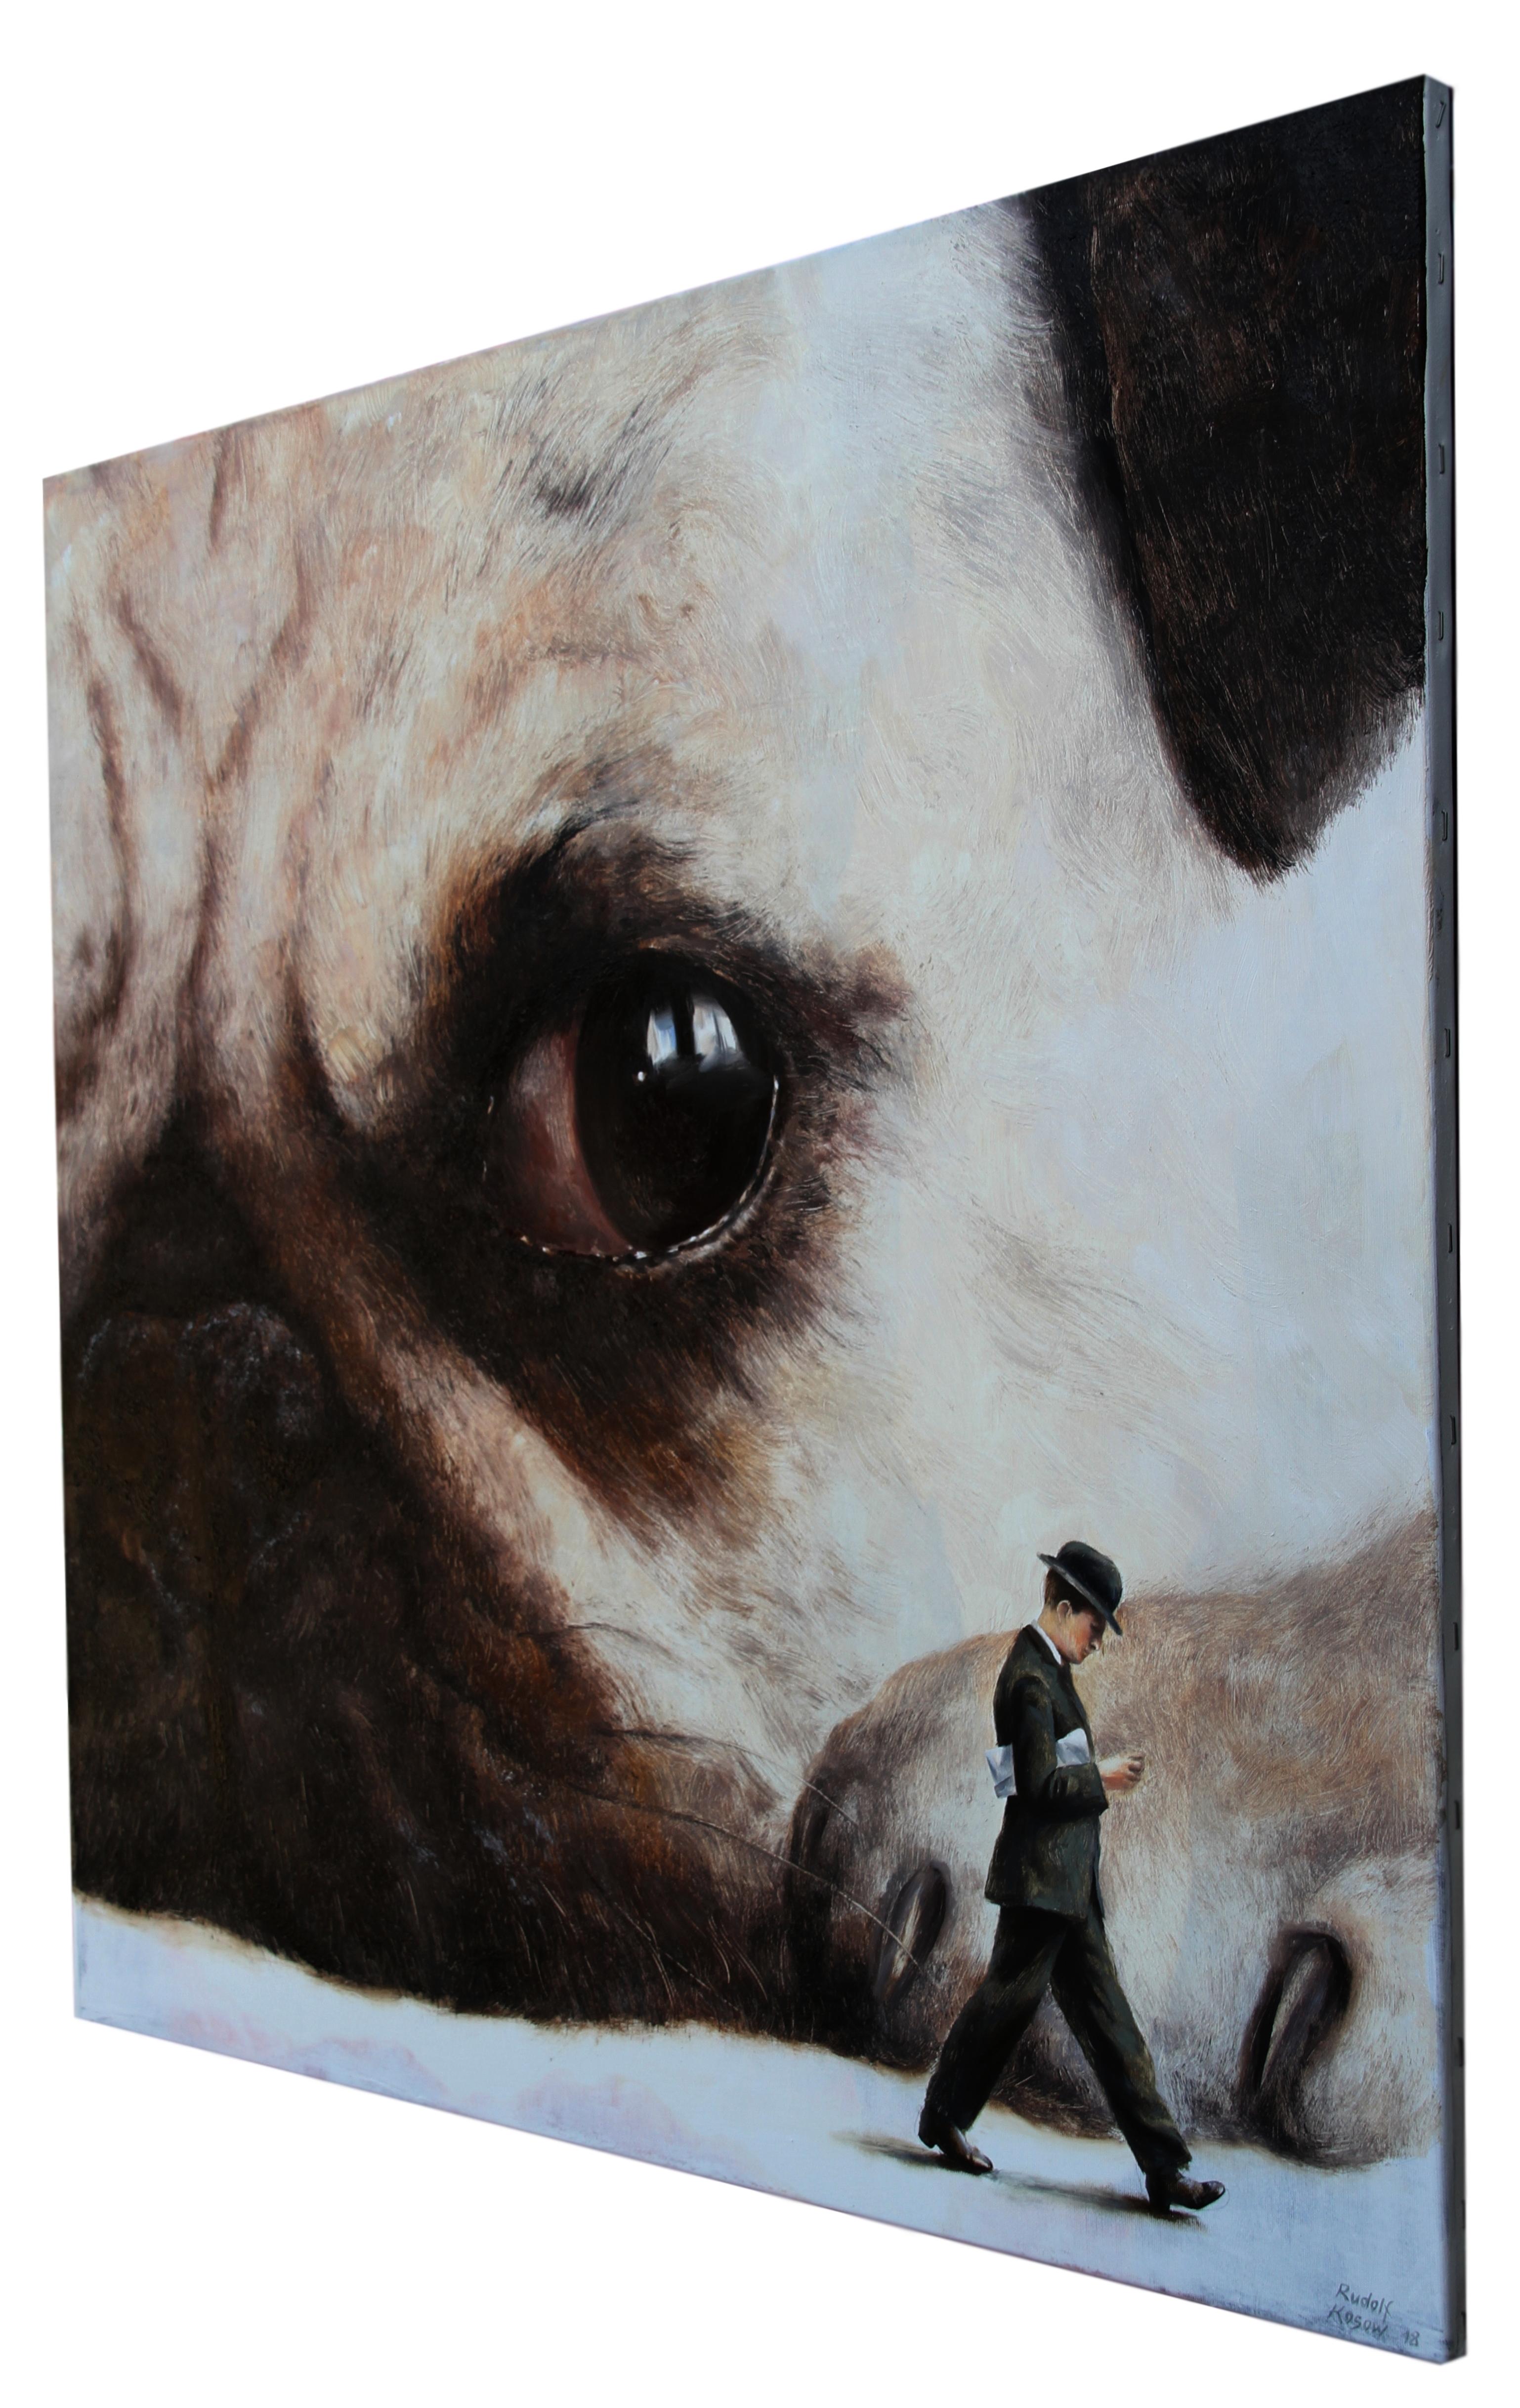 Incident (Pug face dog man's best friend vintage oil painting surreal - Painting by Rudolf Kosow